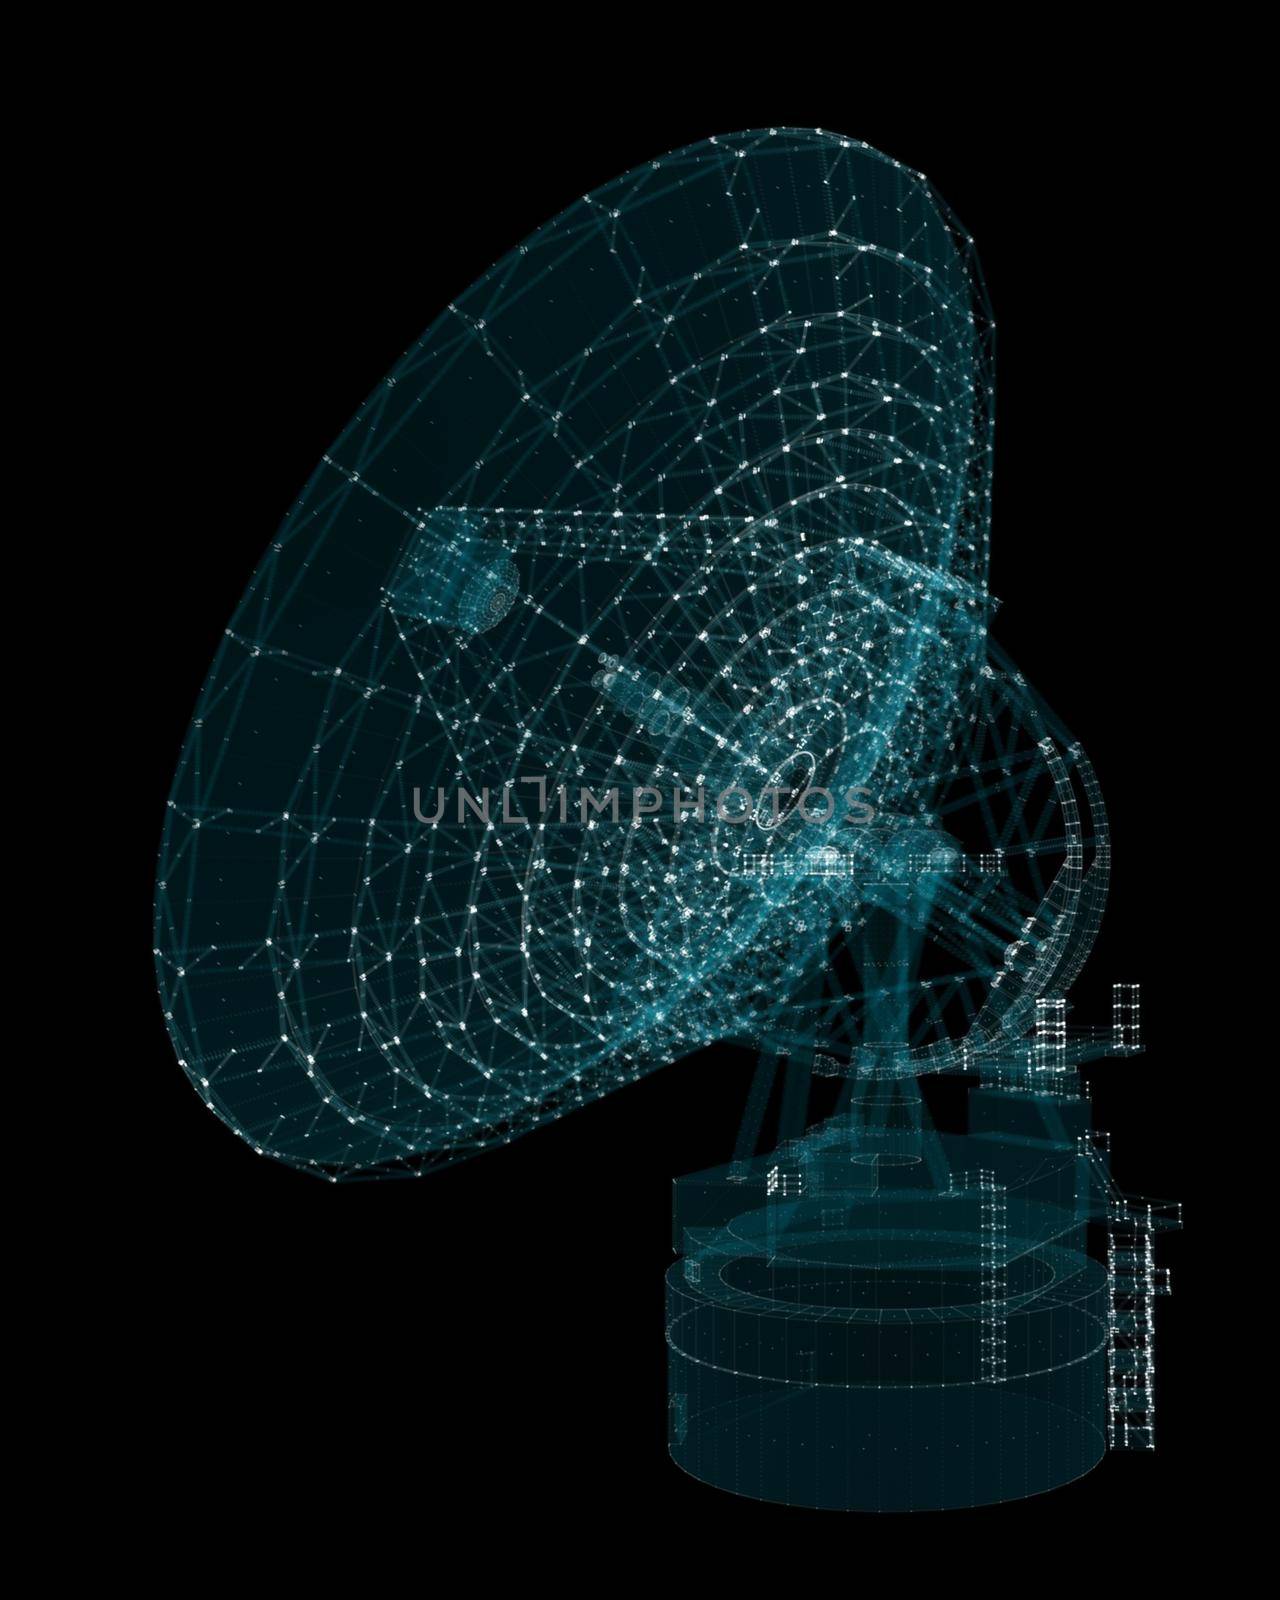 Hologram Large Satelite Dishes Telescope. Science and Technology Concept by cherezoff